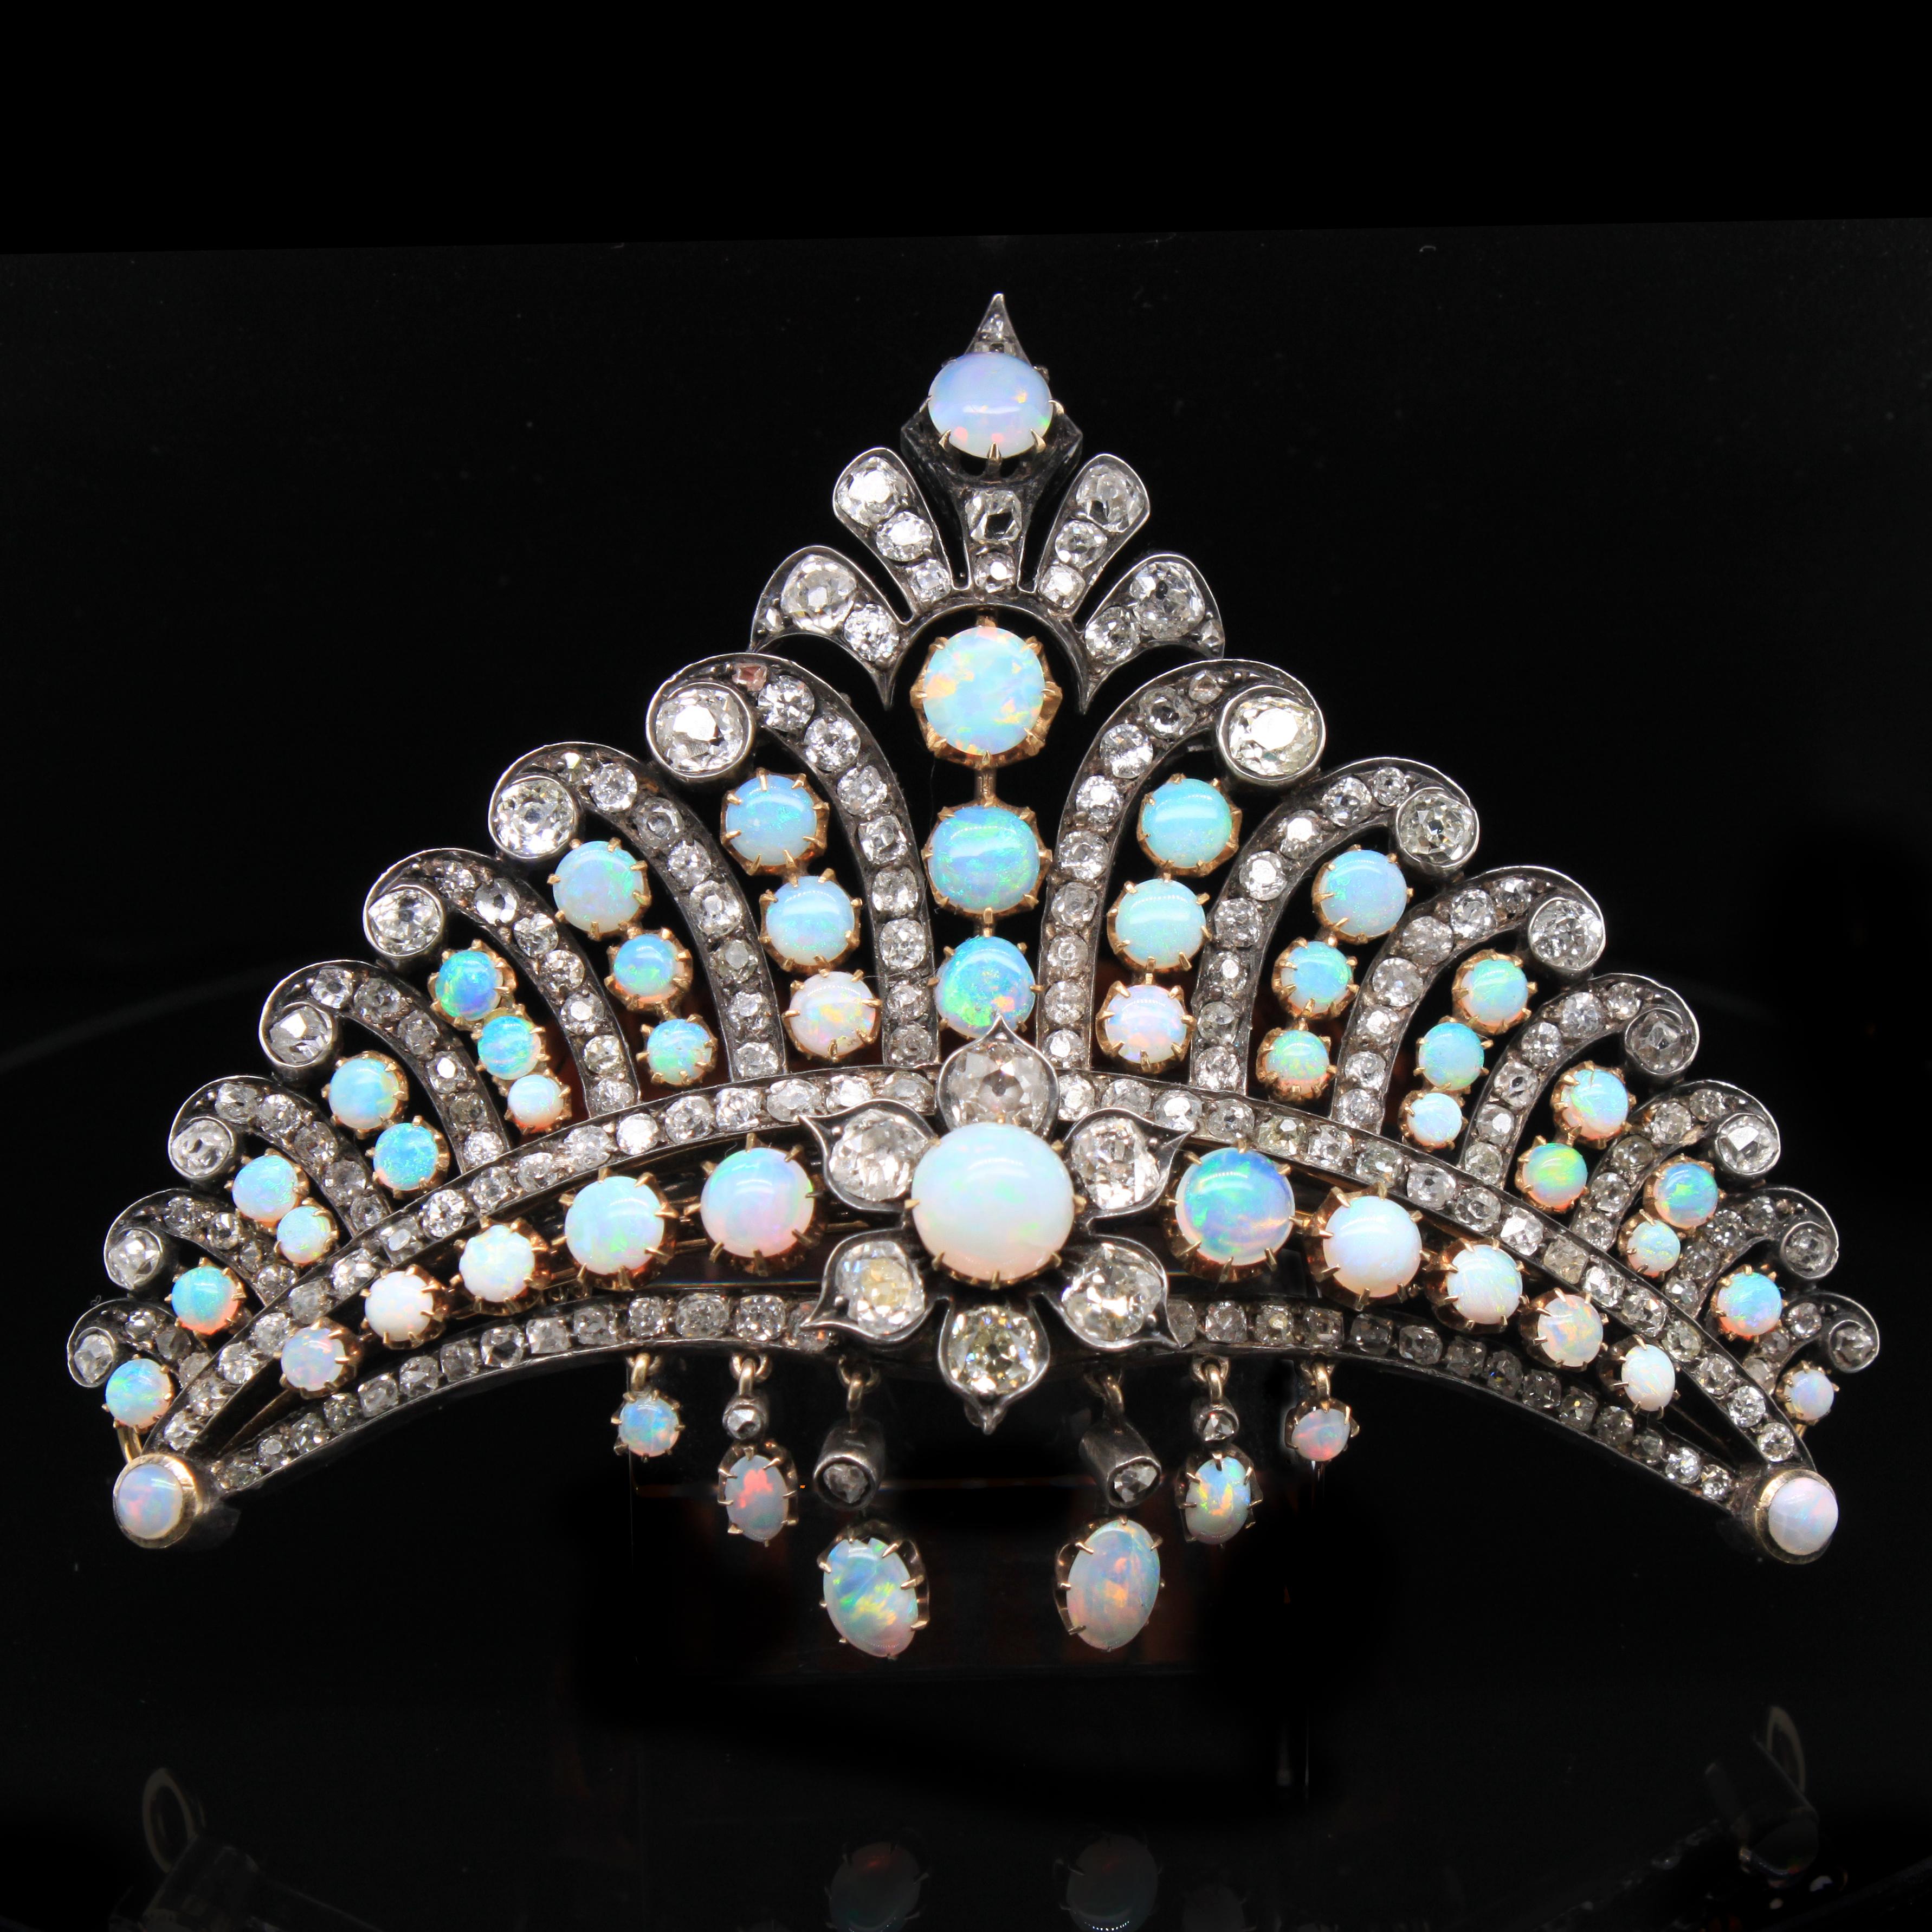 Victorian Opal and Diamond Crown Haircomb Necklace, ca. 1880s

A very unusual and stunning Victorian crown, set with fiery opal cabochons and old-mine cut diamonds, from the 1880s.
The setting alternates with rows of fine opal cabochons that show a